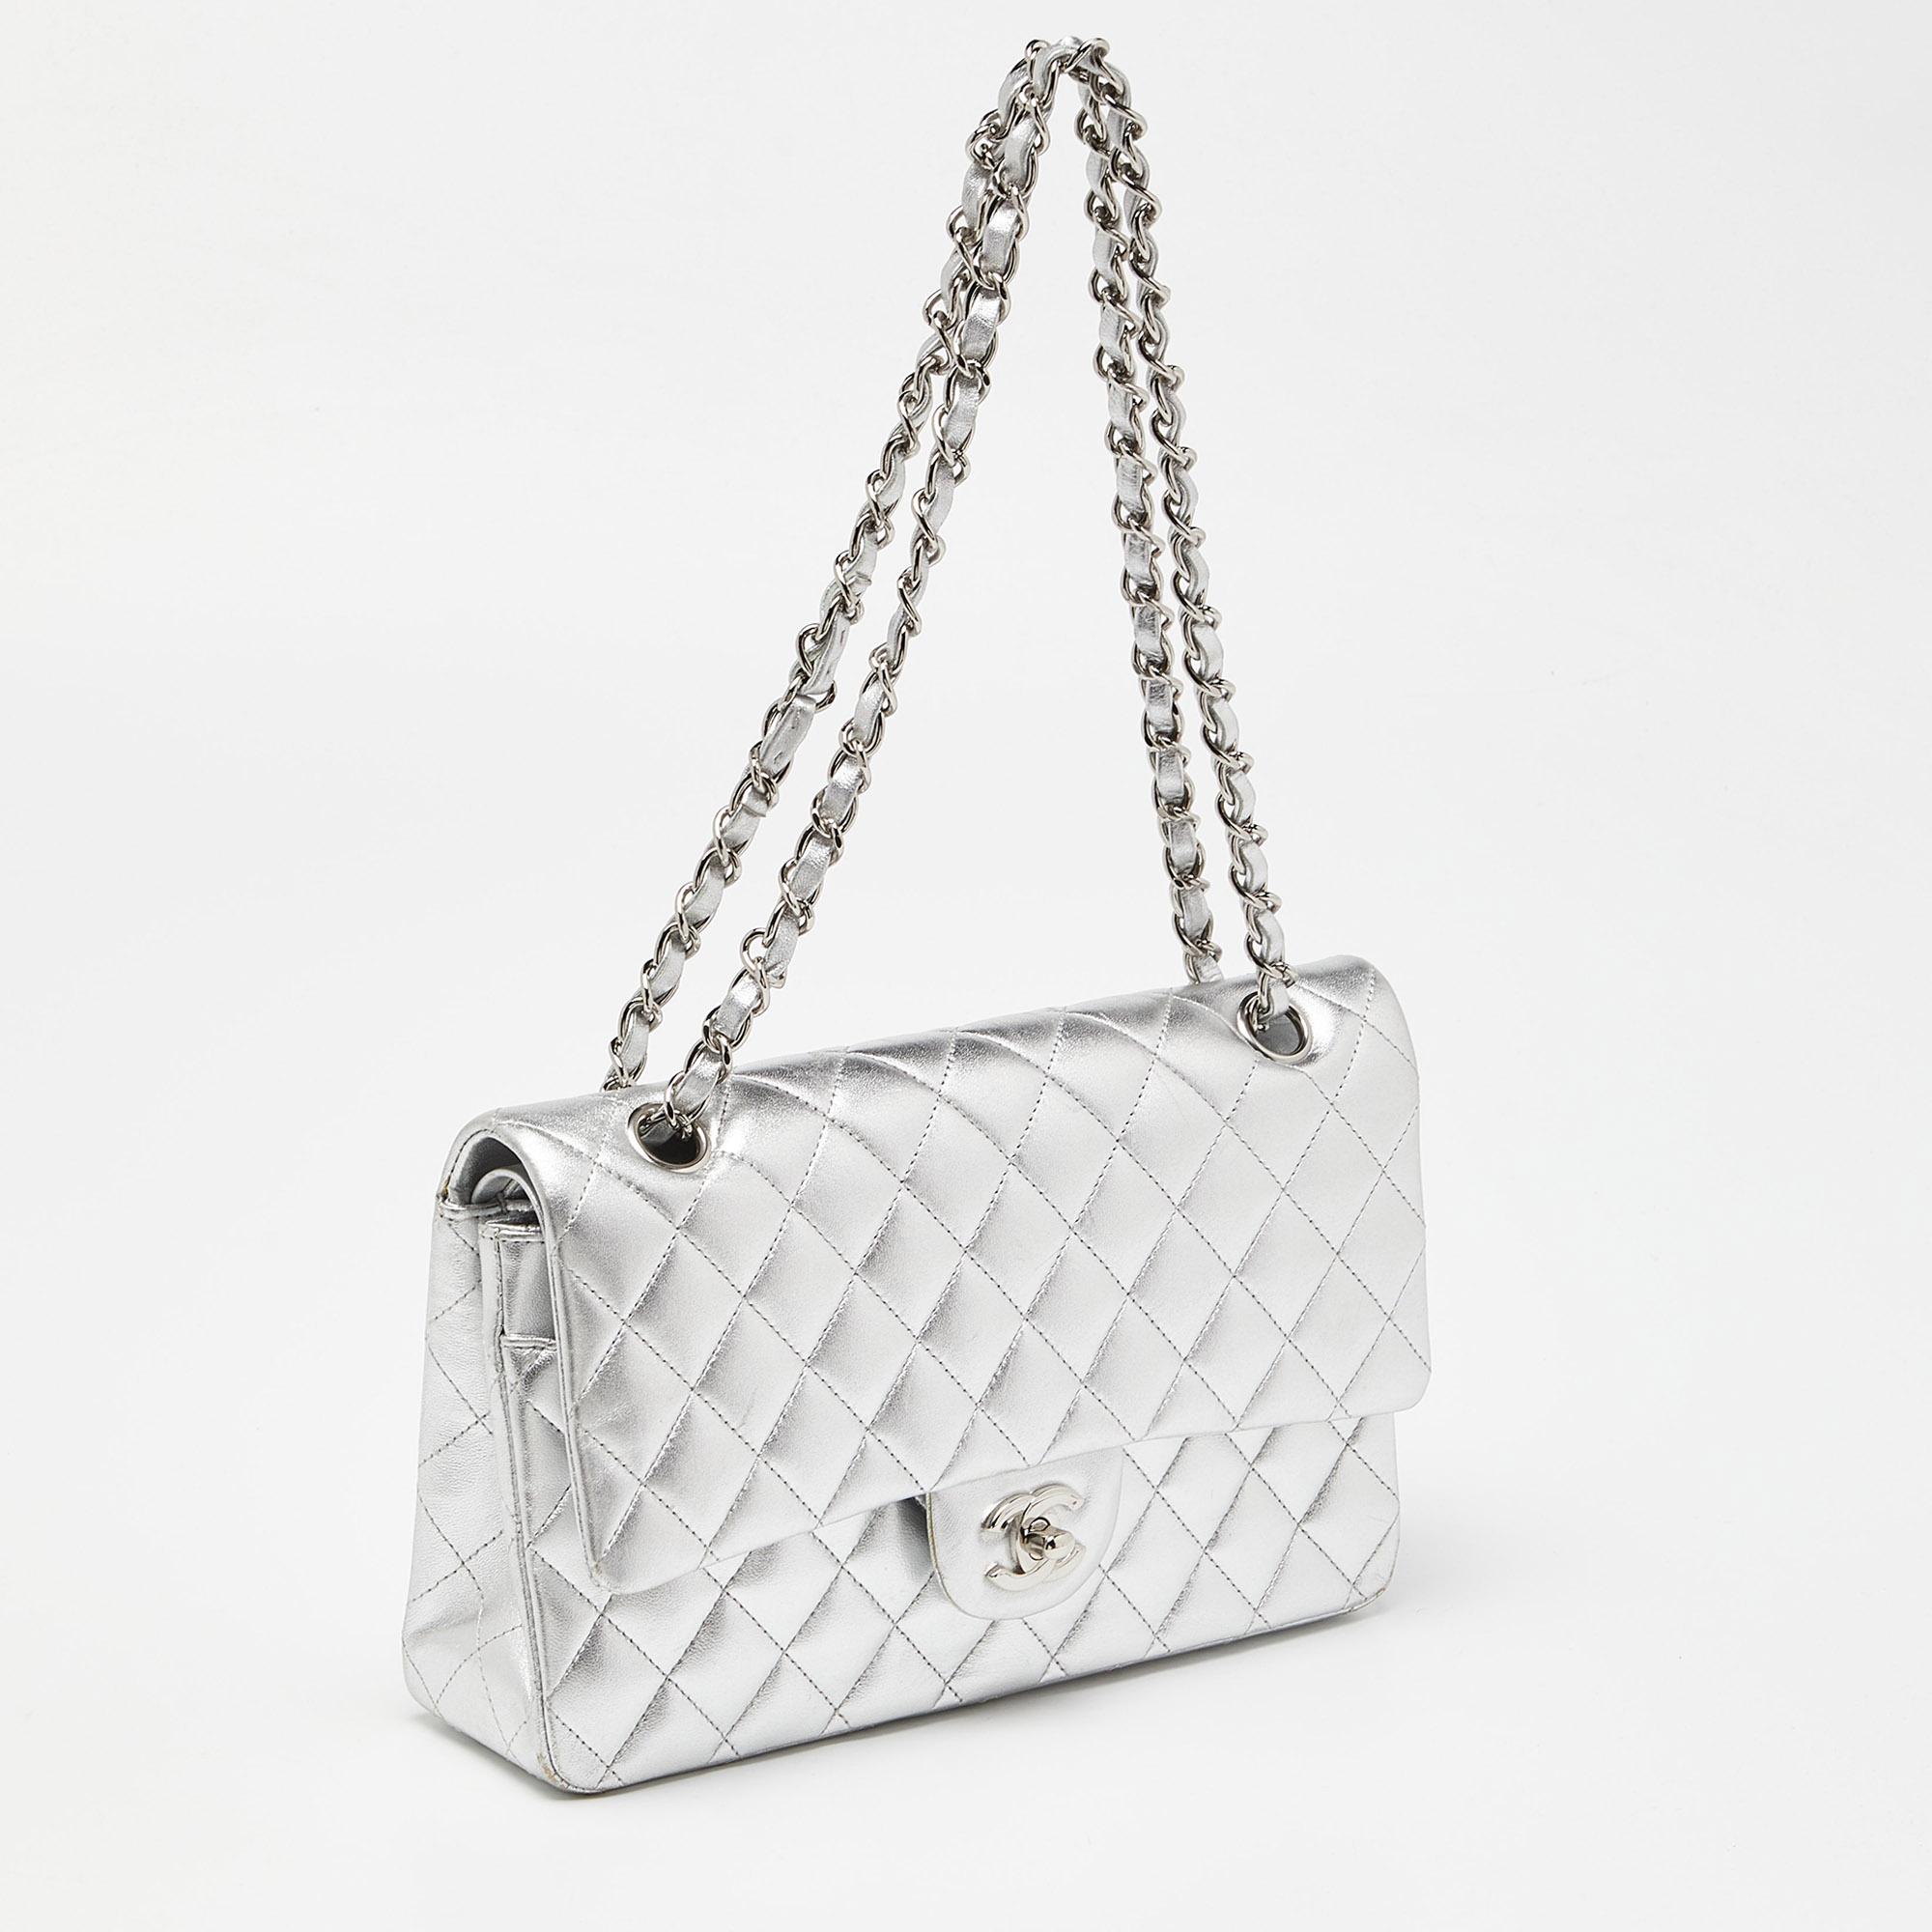 Chanel Silver Quilted Leather Medium Classic Double Flap Bag In Good Condition For Sale In Dubai, Al Qouz 2